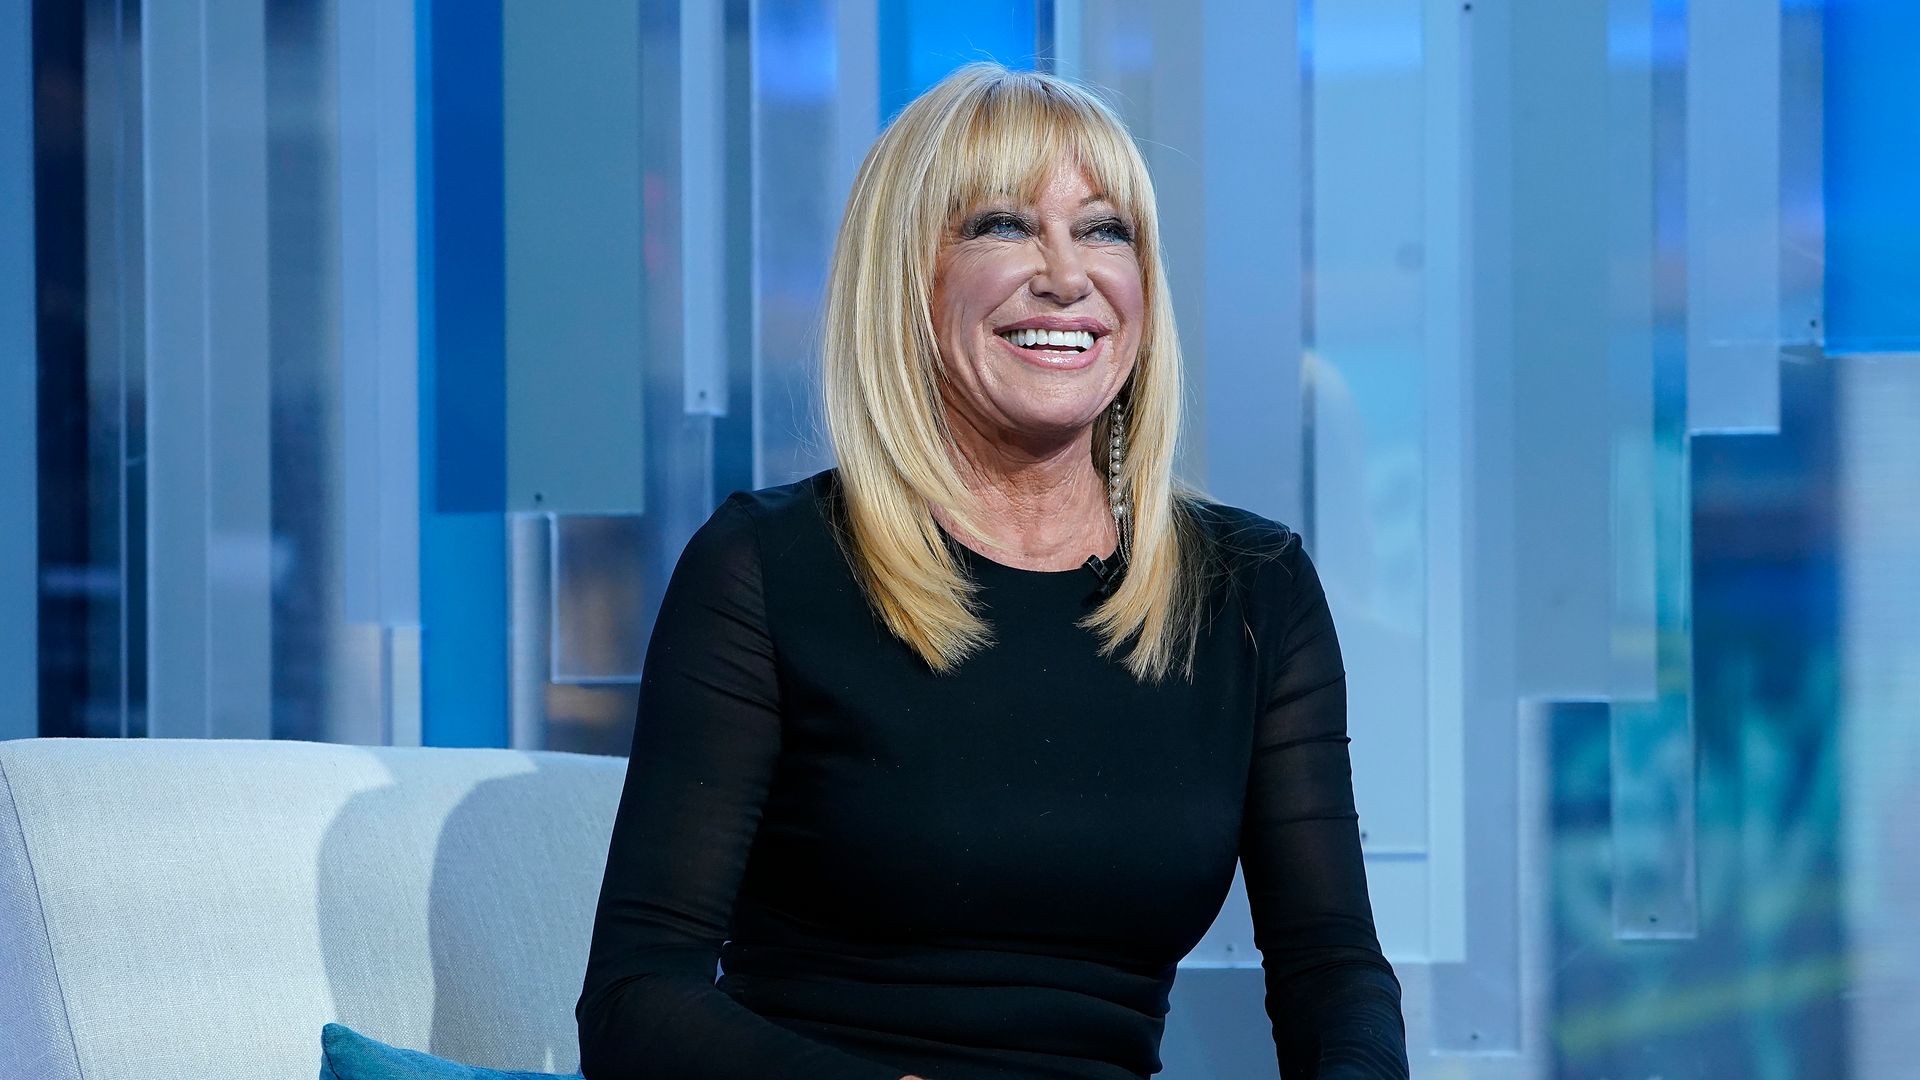 Suzanne Somers during' "Mornings With Maria" at Fox Business Network Studios on January 09, 2020 in New York City